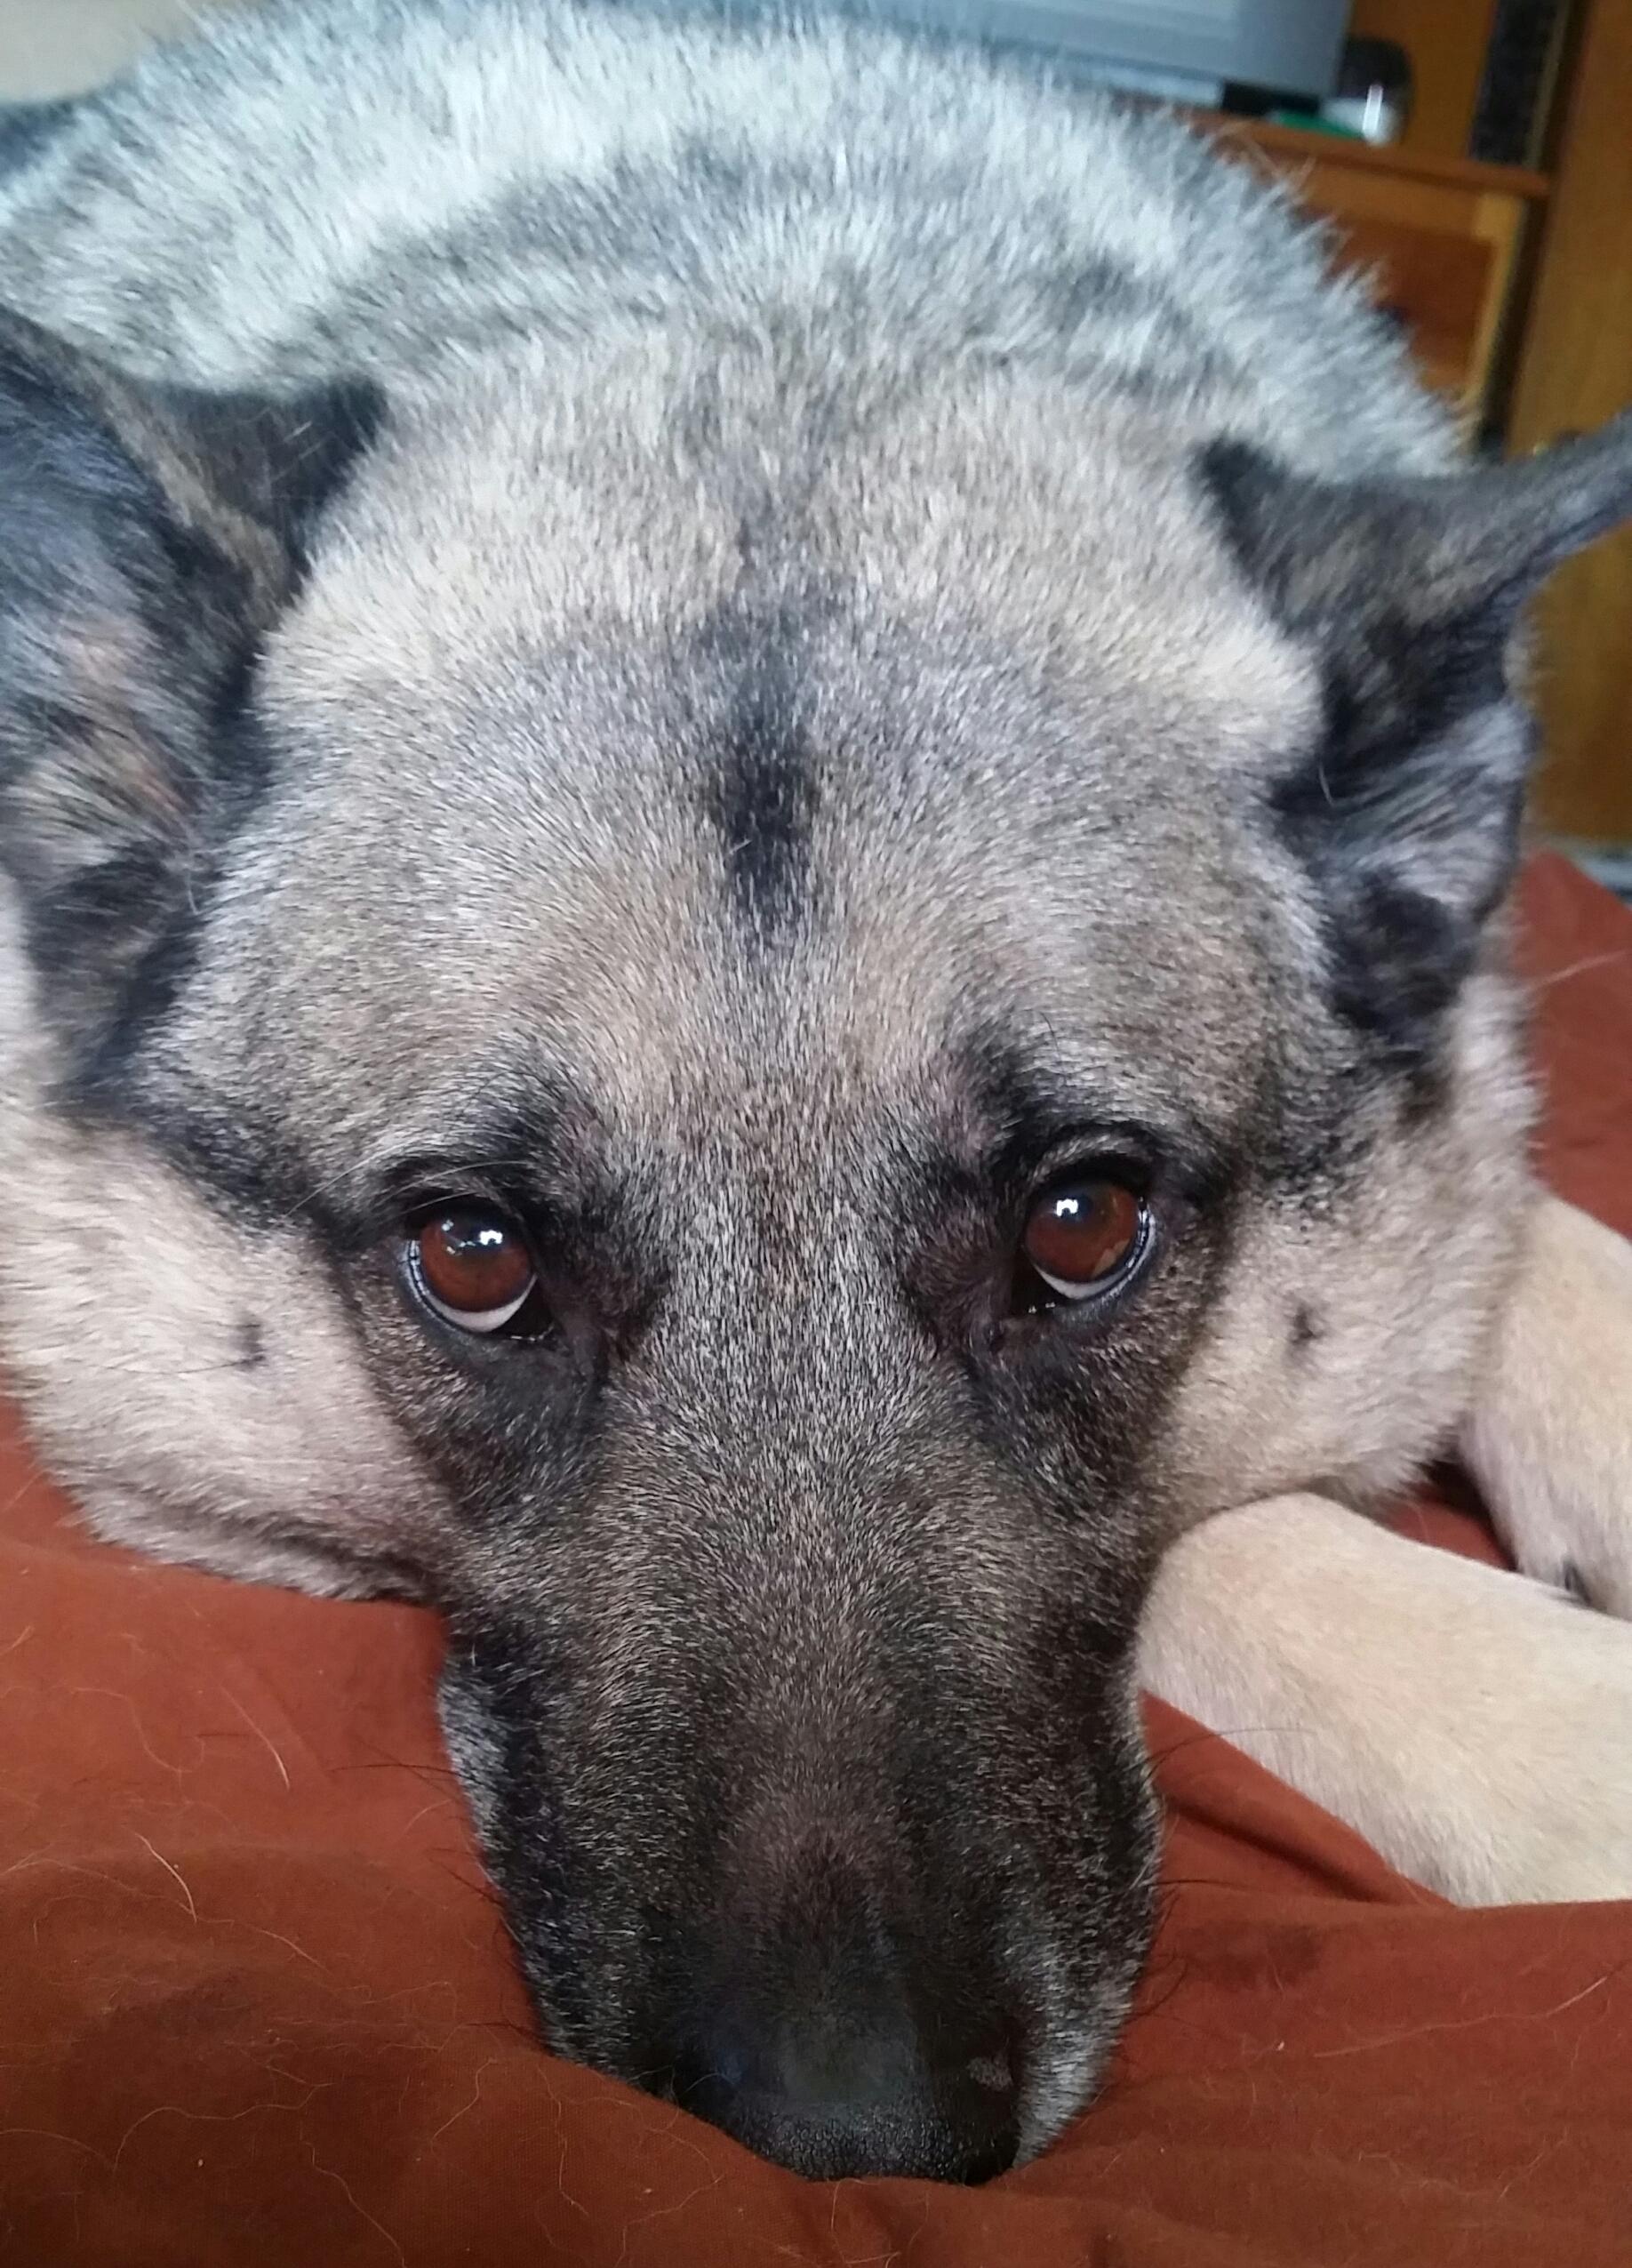 A Norwegian Elkhound lying on the couch with its sad face